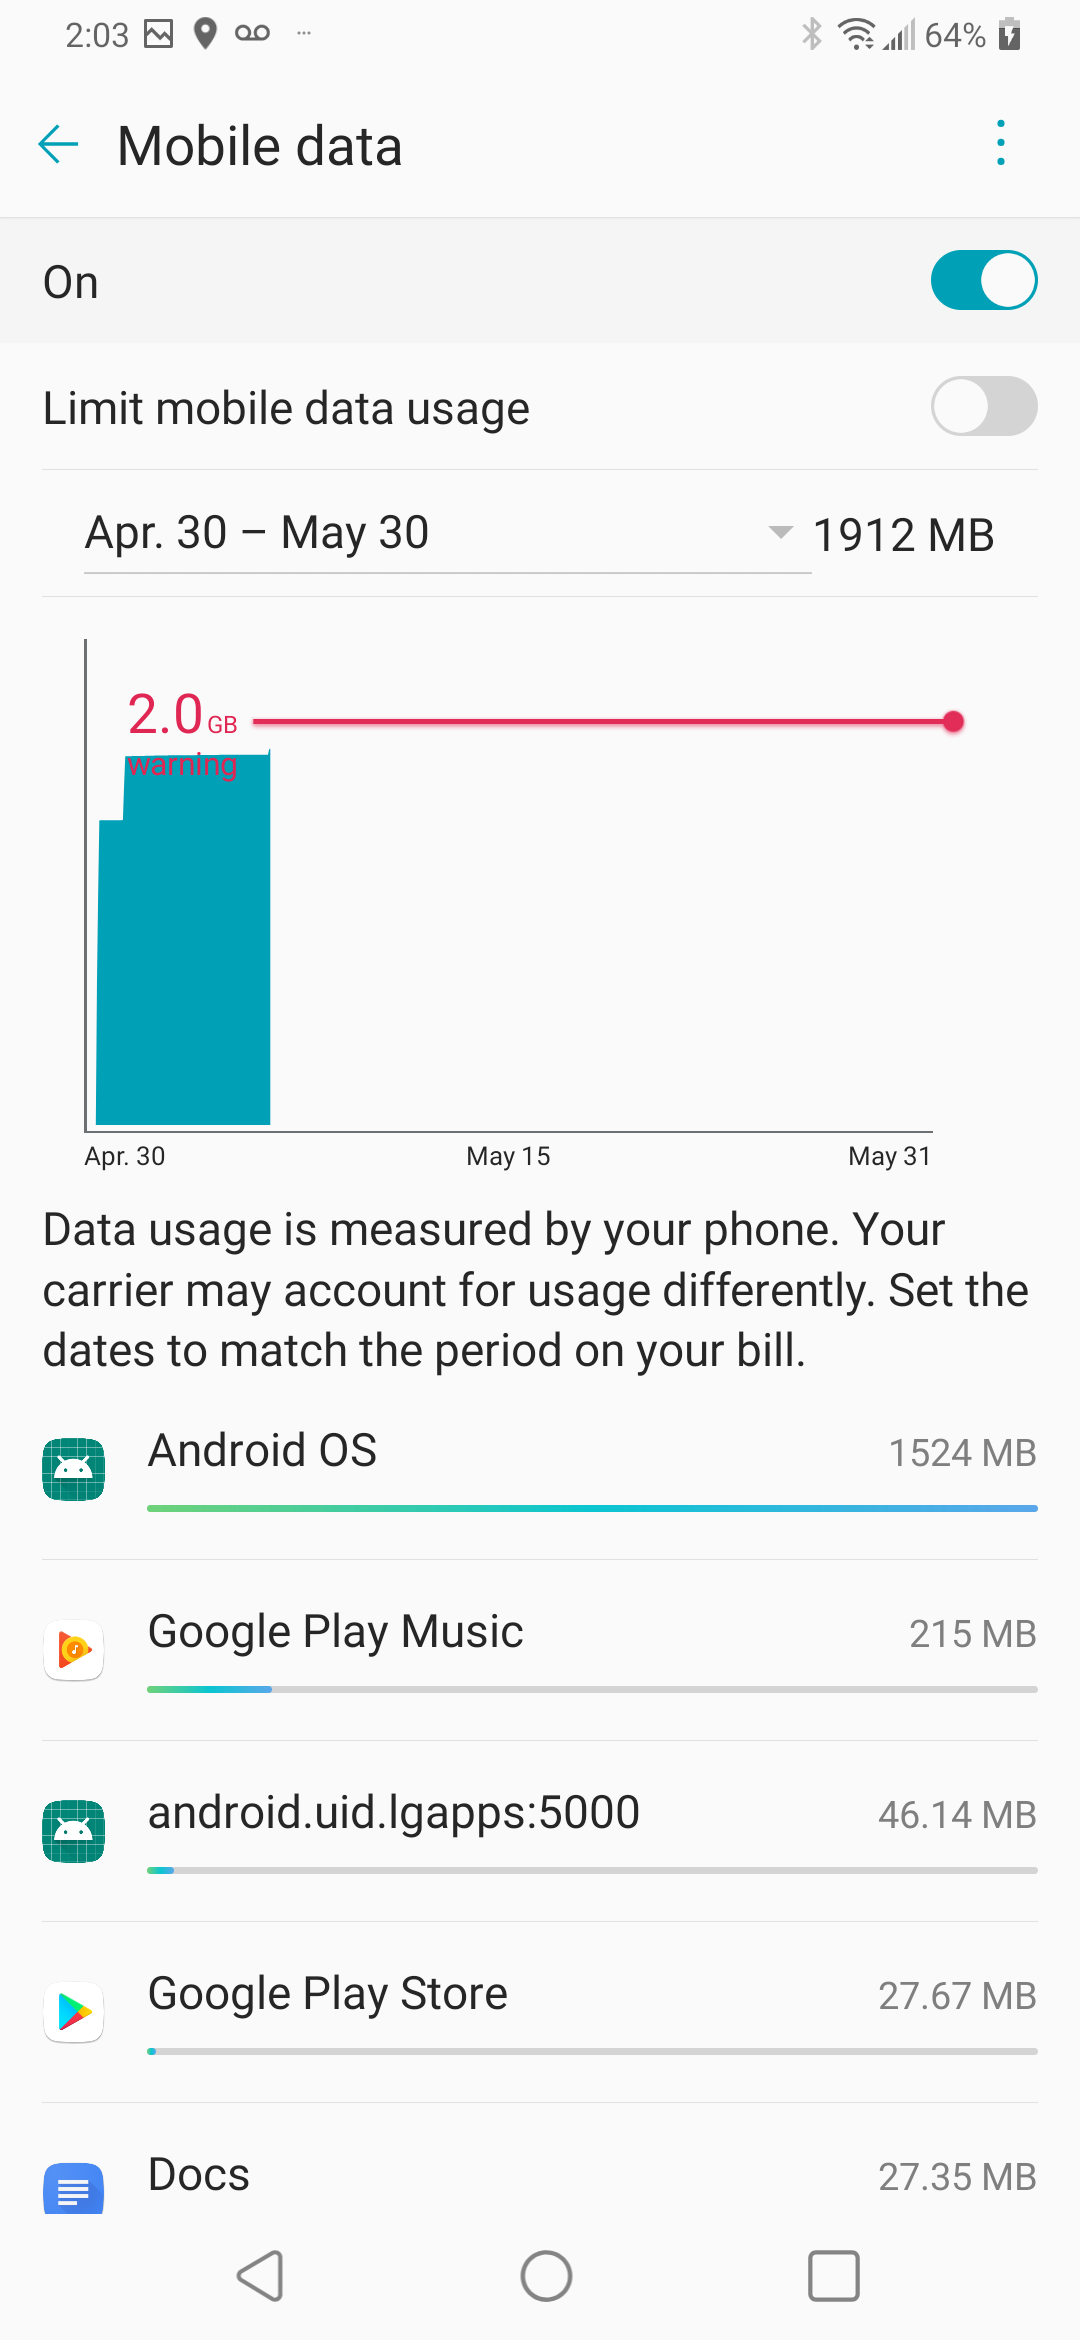 Touch the Limit mobile data usage slider to turn it on.